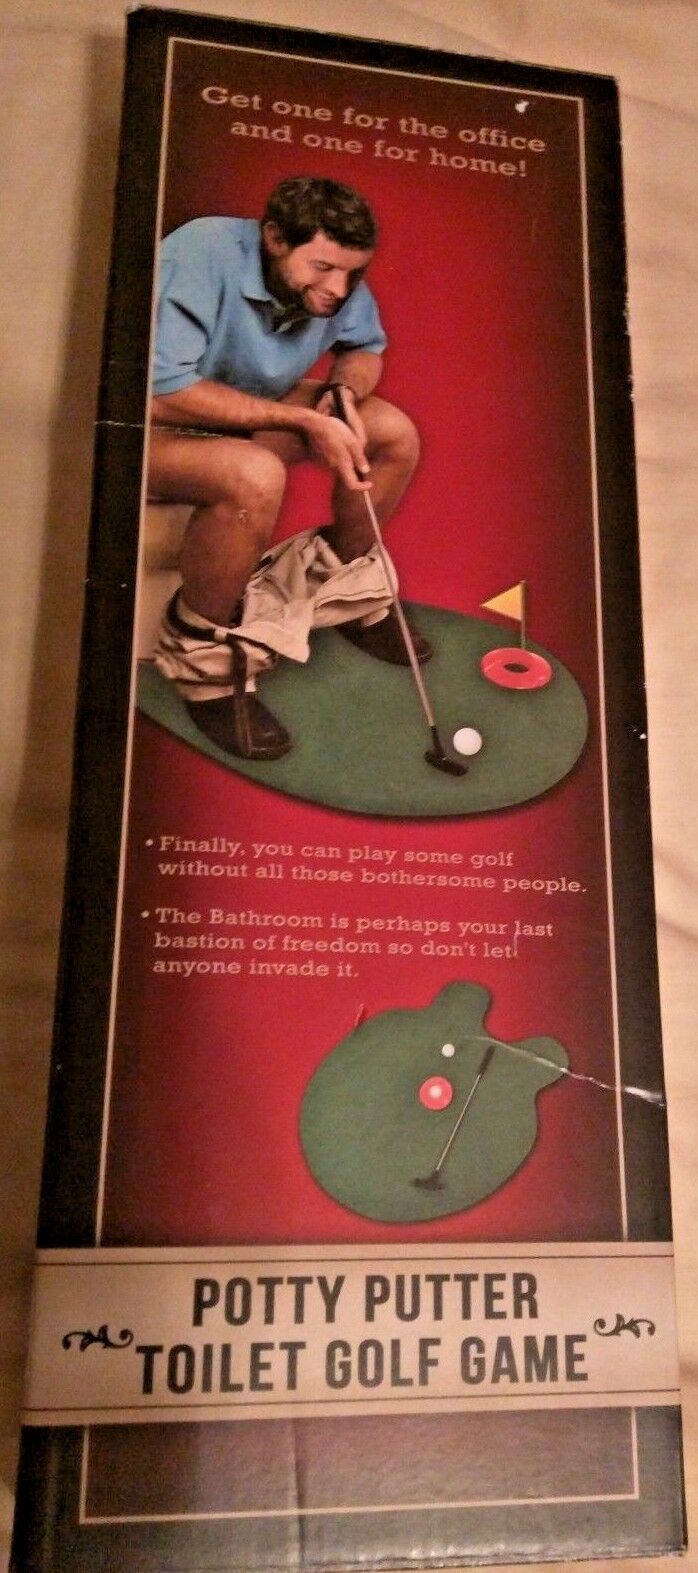 Toilet Bathroom Mini Golf Game Potty Putter Sports Silly Gag Gift Novelty